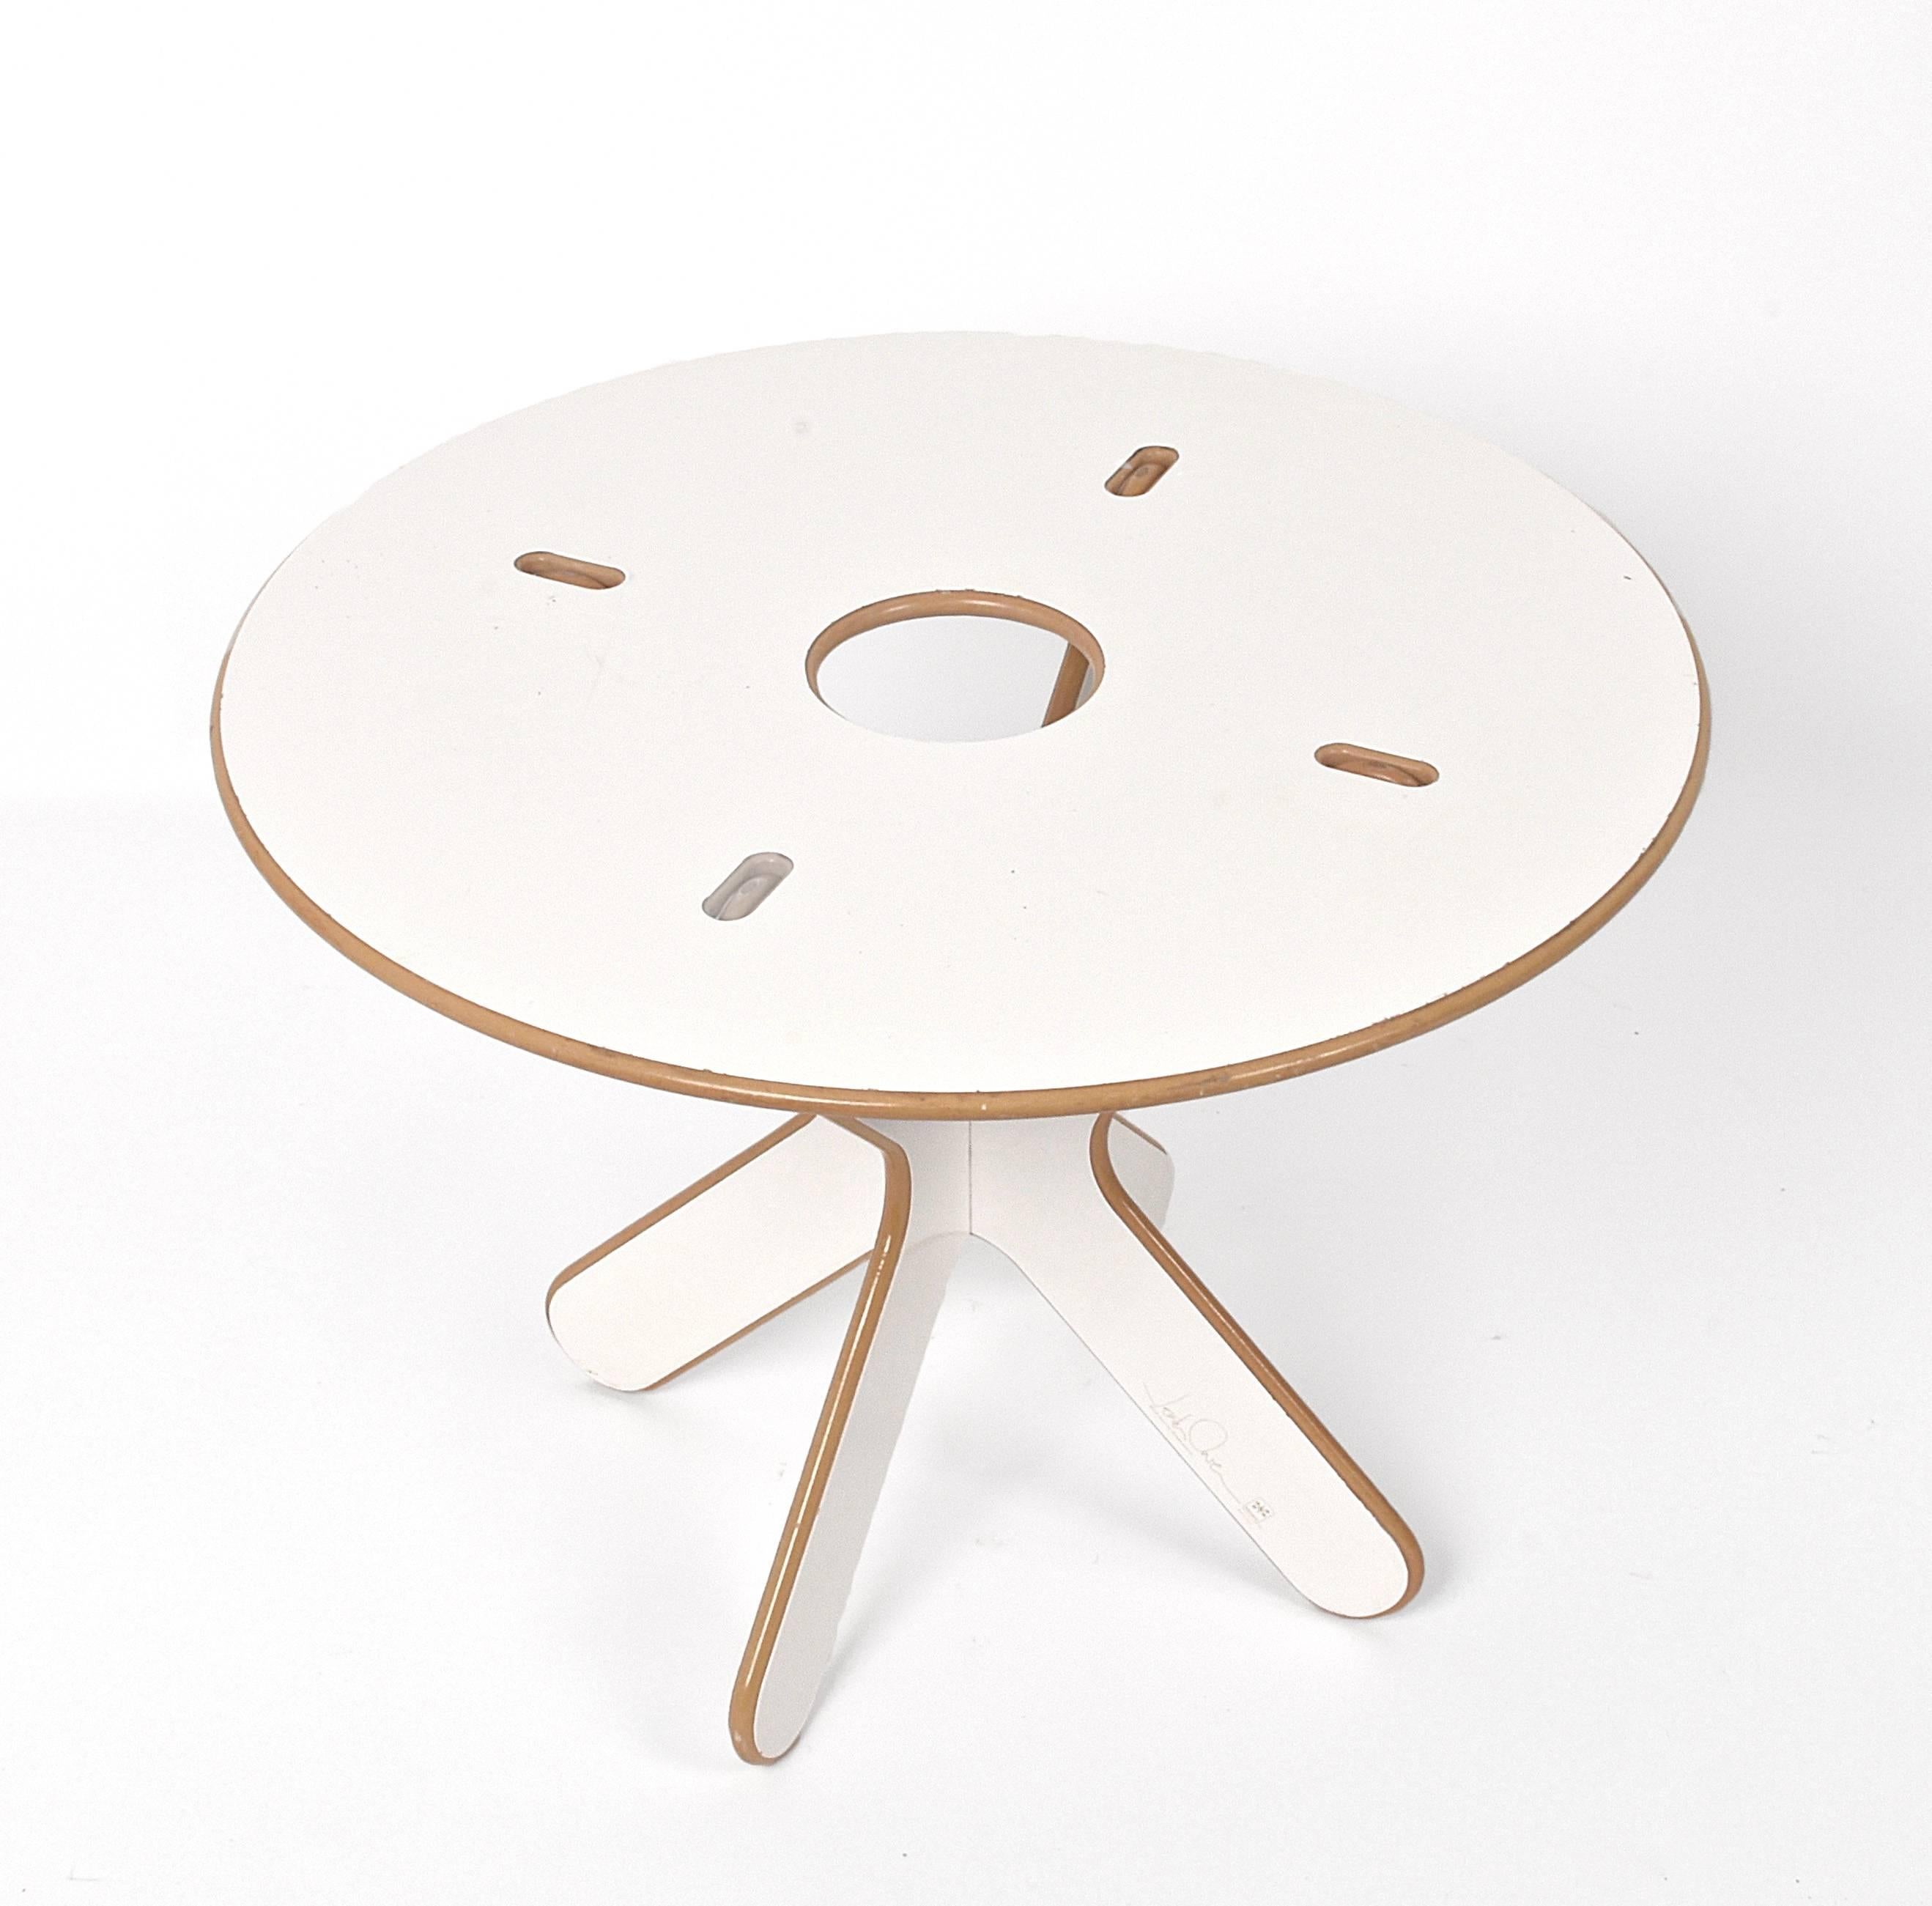 XOX table
The XOX table is a ready to assemble end table that, as its title implies, is a labour of love to put together, without tools or hardware. Its simple form and construction relies on the multi-faceted functionality of MDF. The exposed